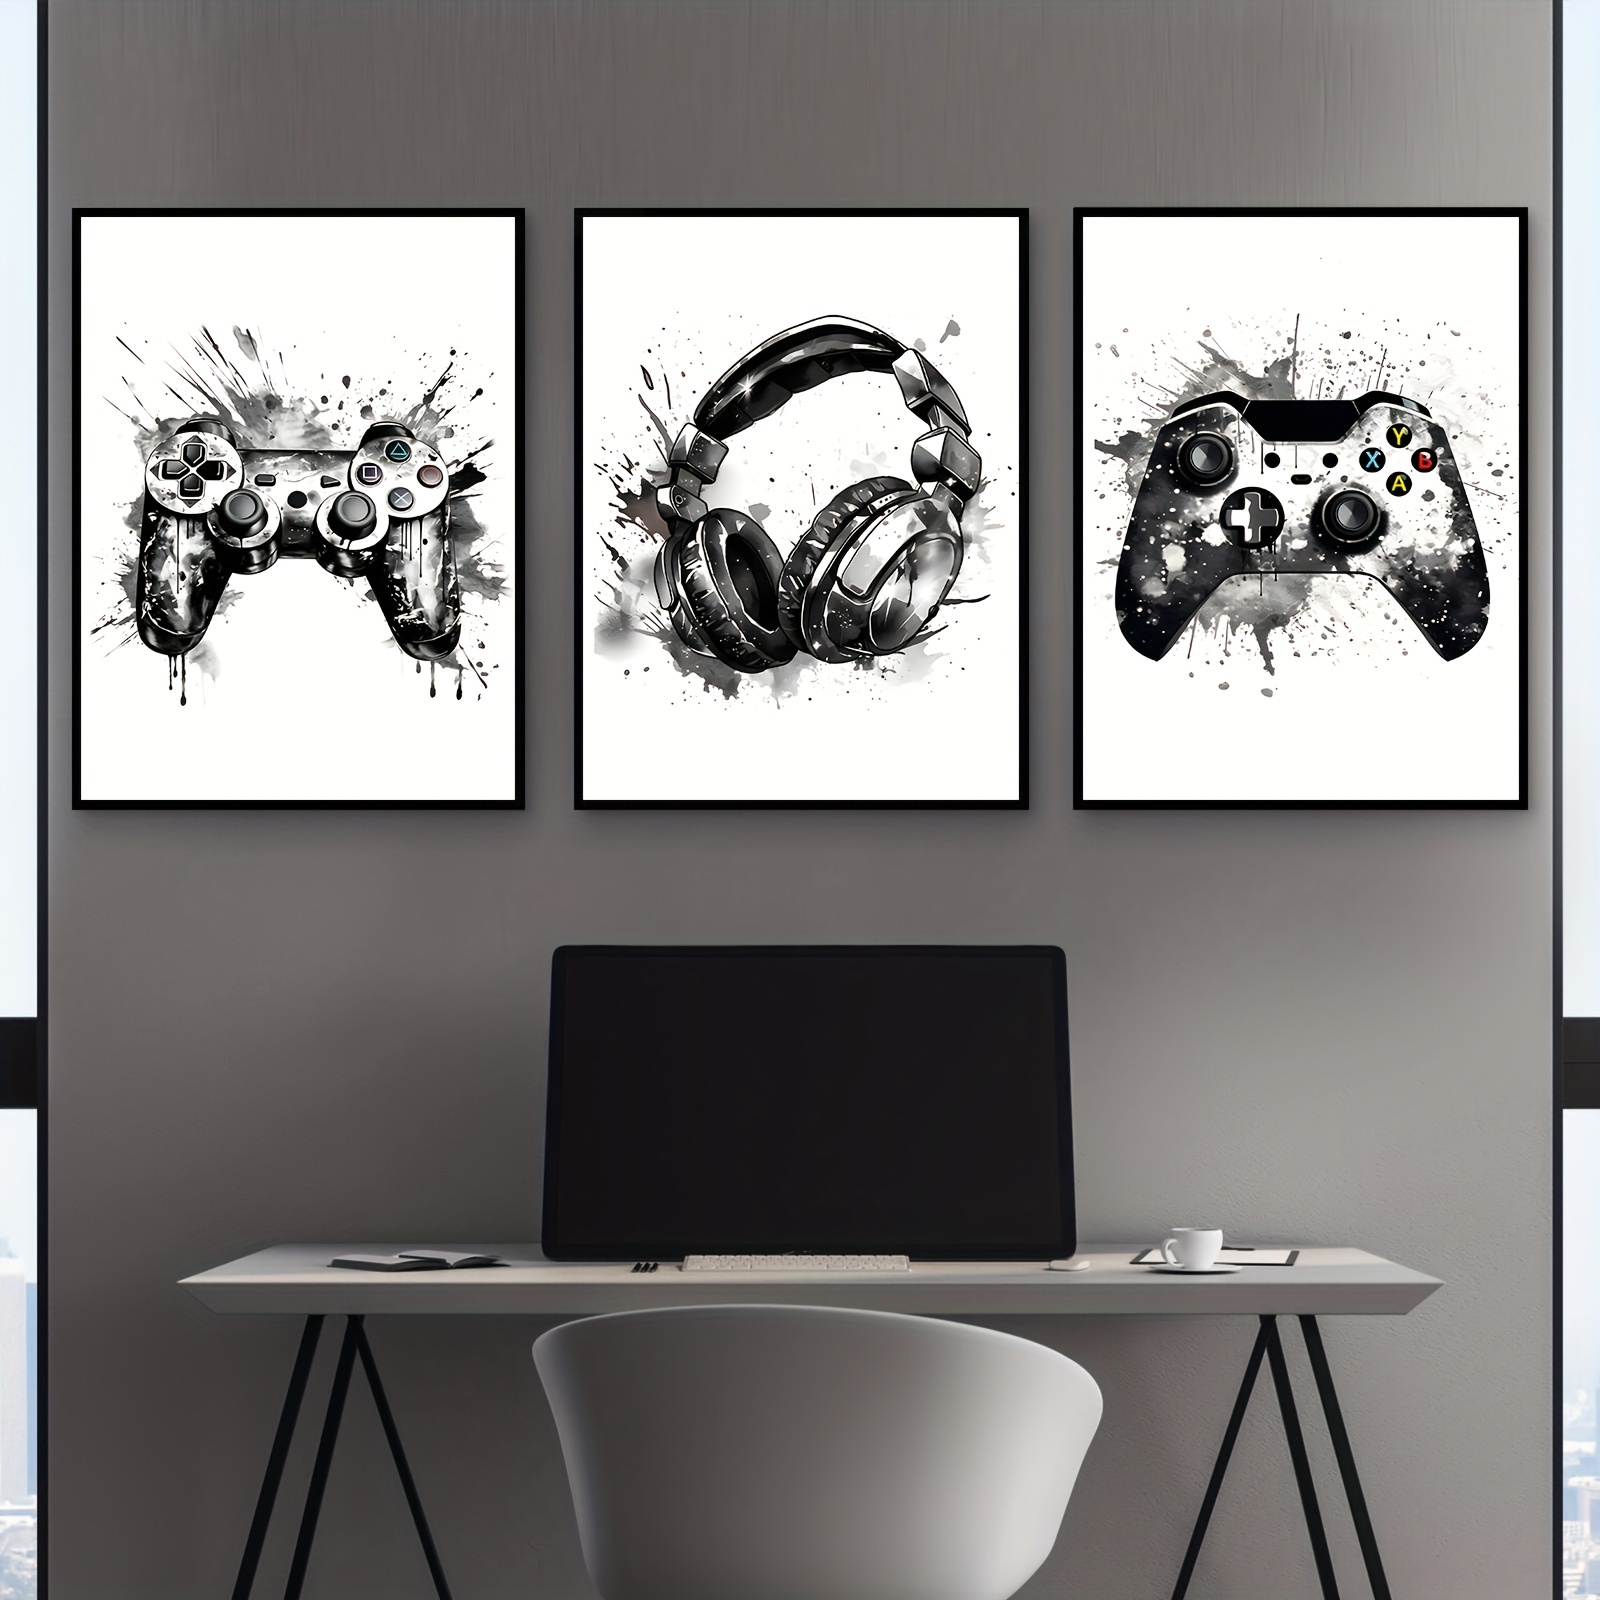 4 Panel Video Game Inspired Quotes Poster Canvas Black White Red Font  Gaming room Wall Decor Boy's Room Wall Art Boyfriend Gift No Frame tableau  mural